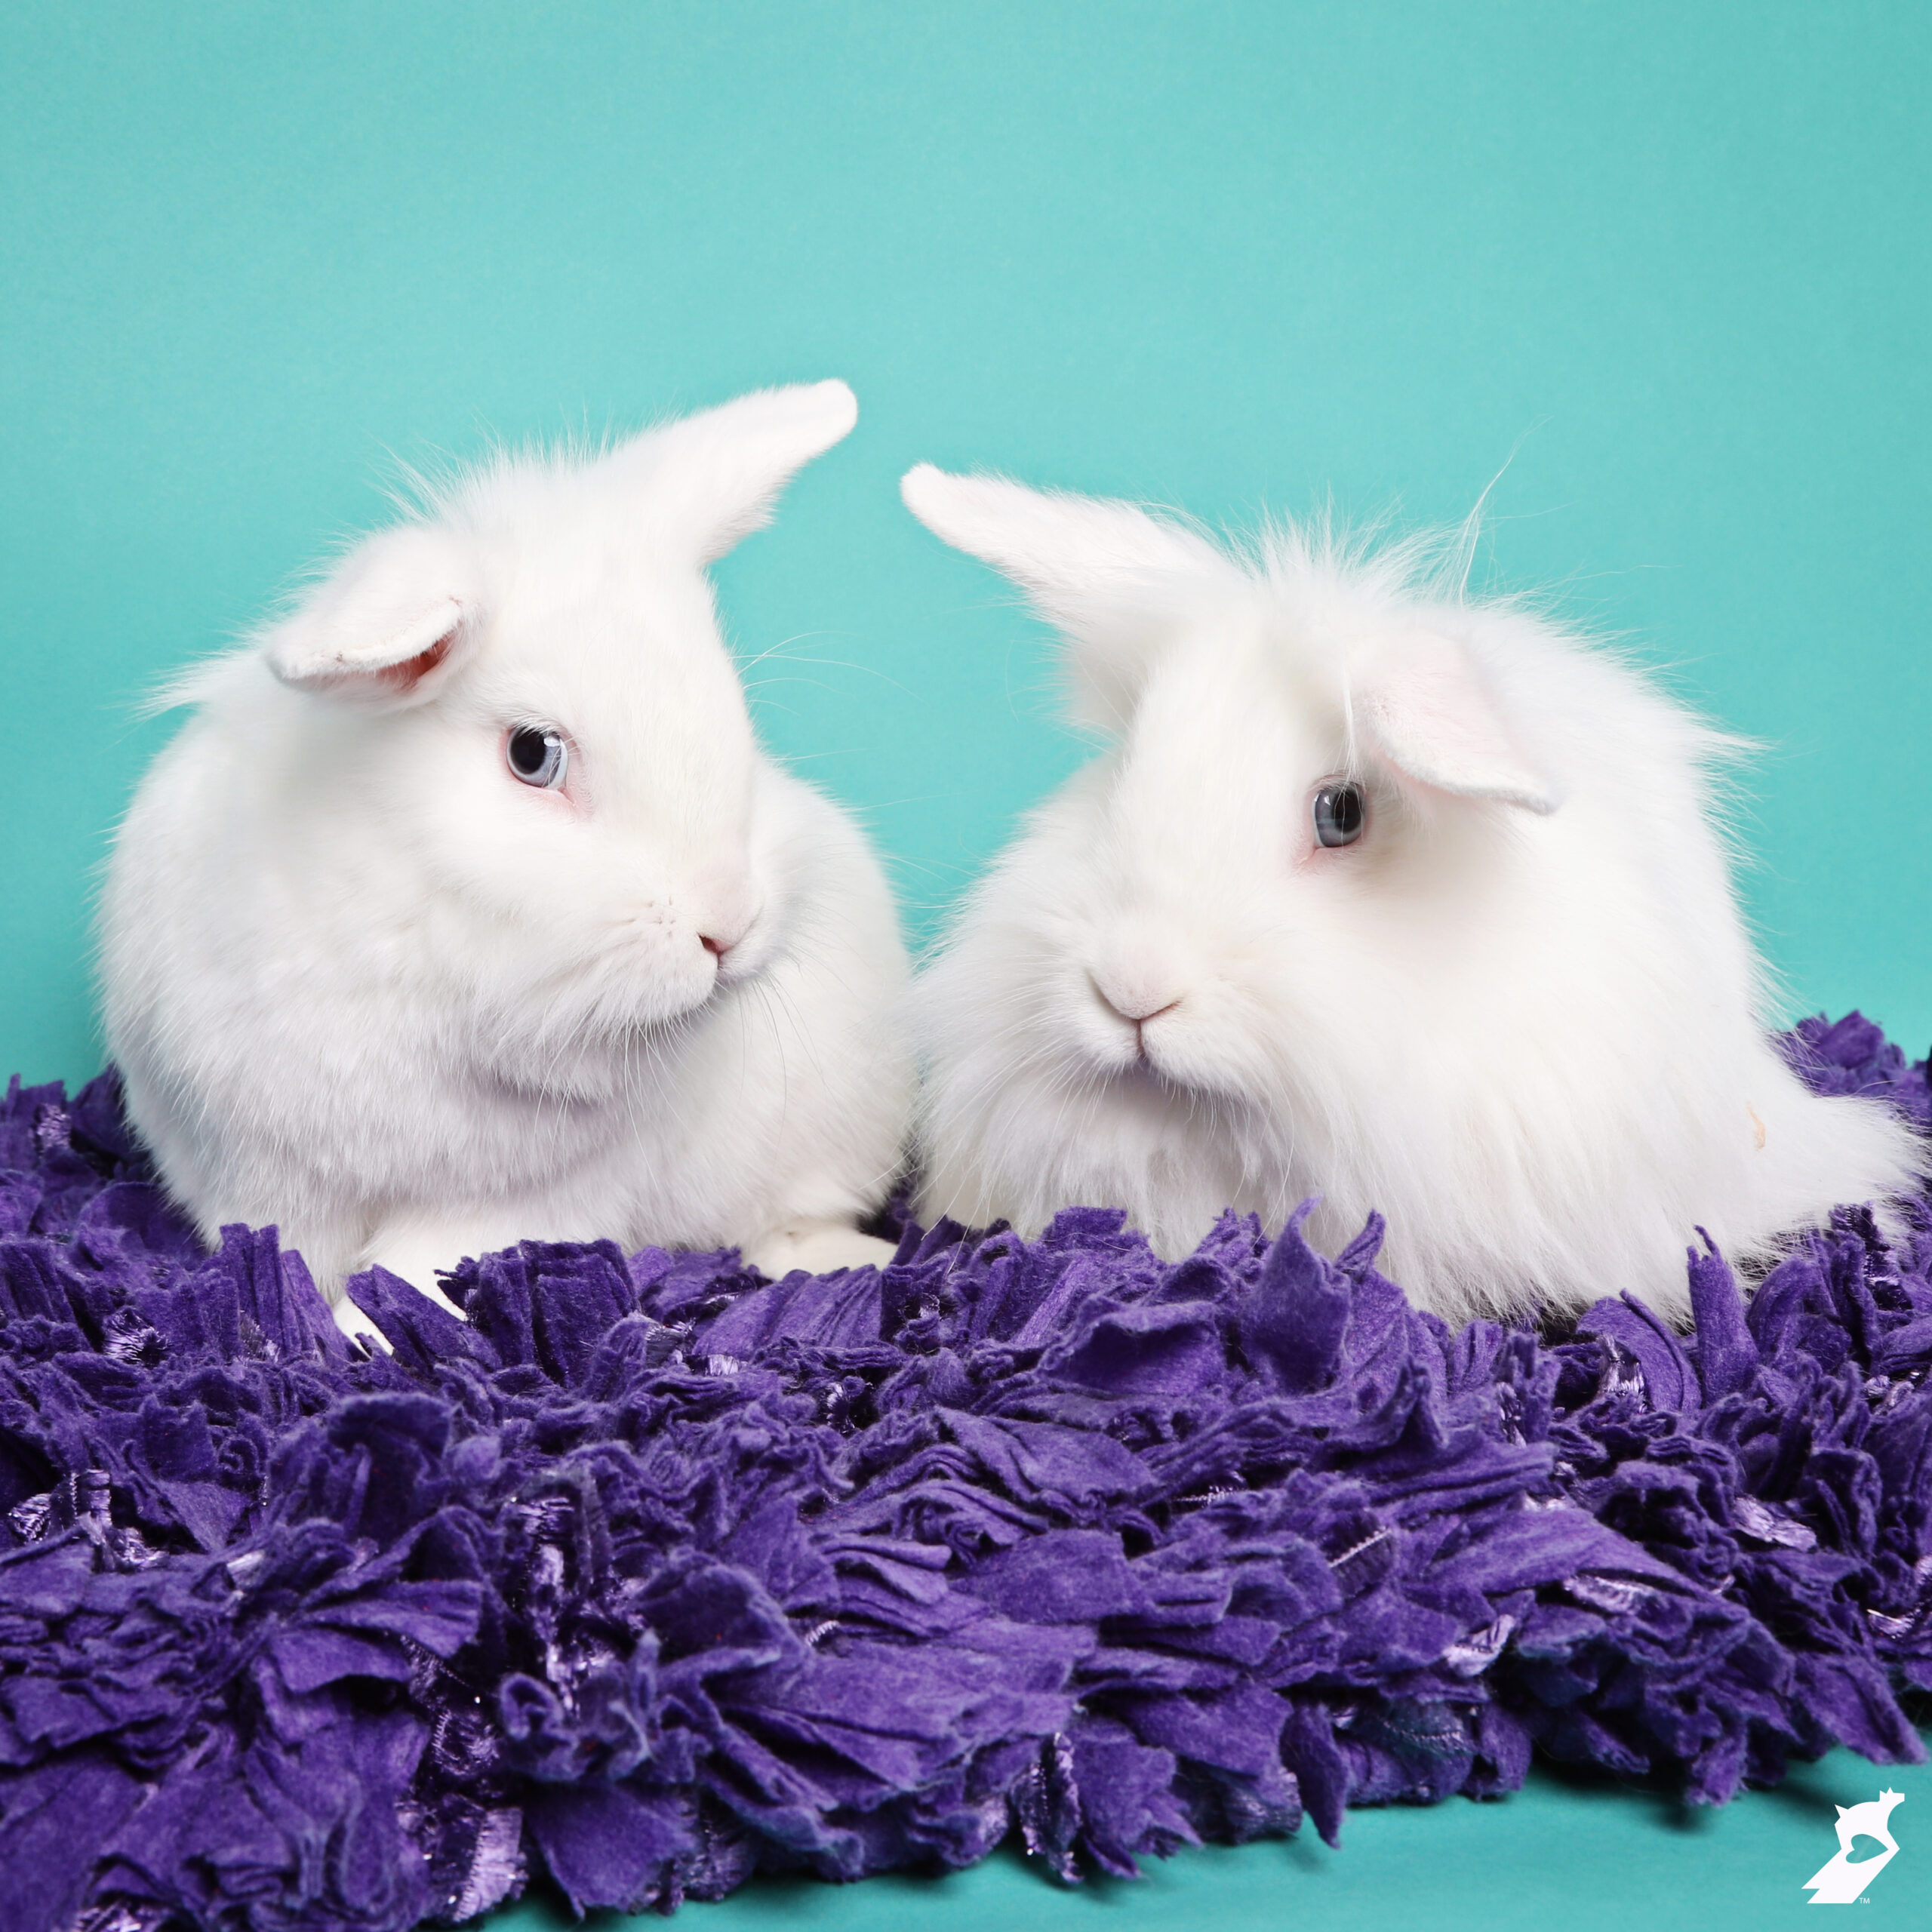 Adopt a Rabbit on National Rabbit Day, Sept. 23